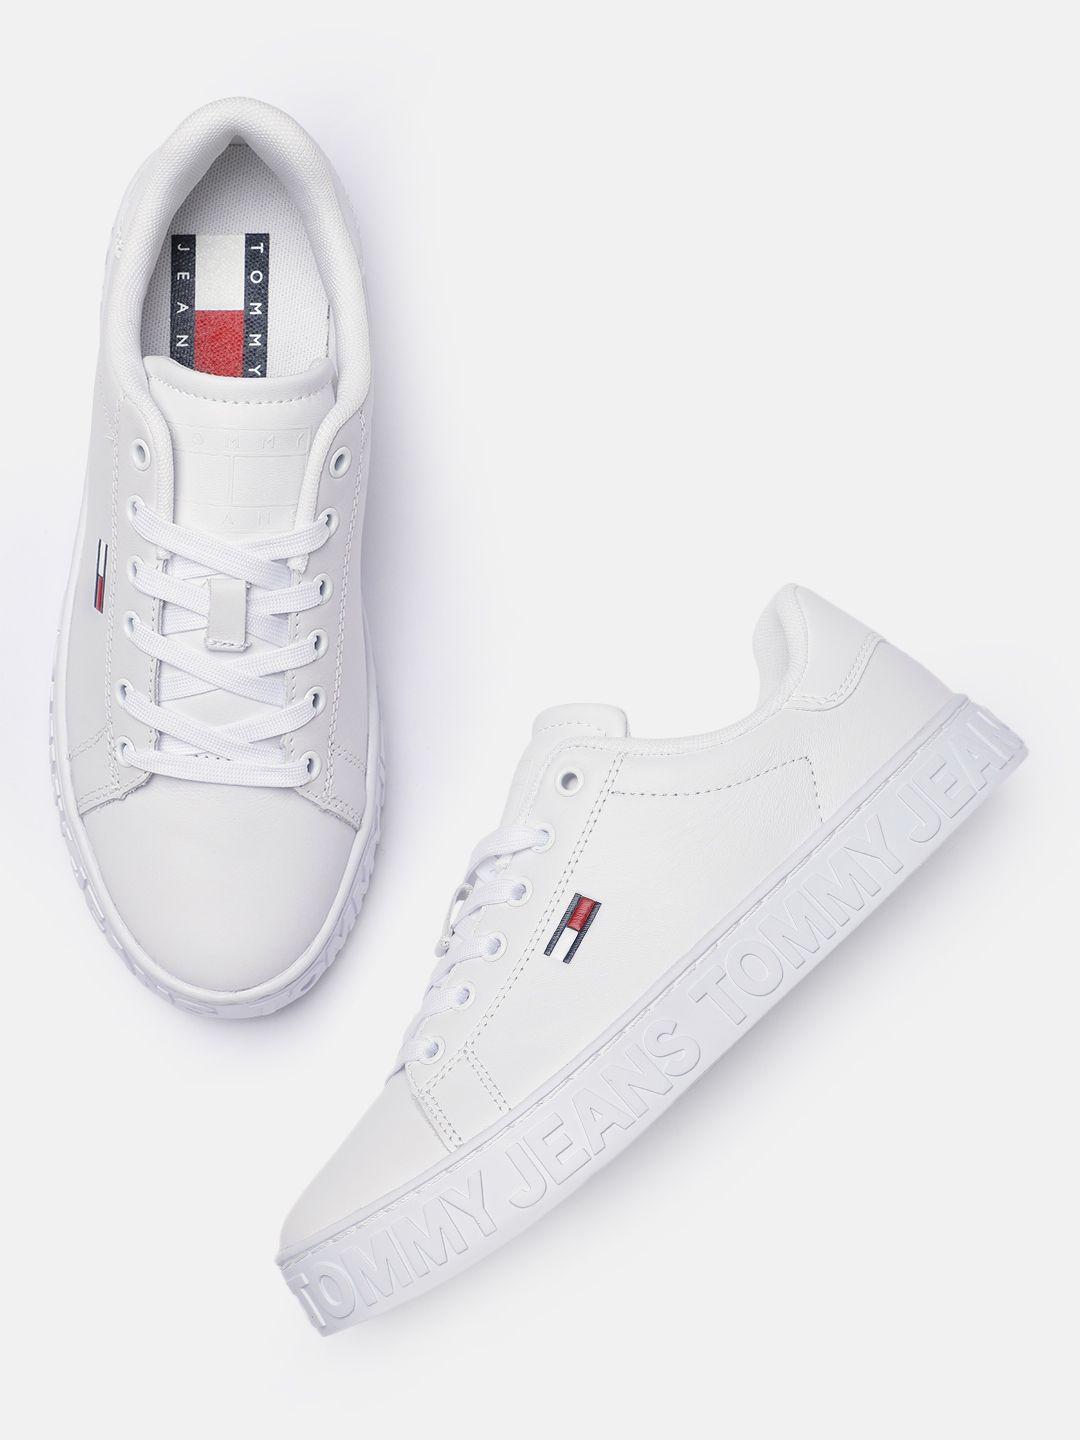 Tommy Hilfiger Women White Solid Sneakers Price in India